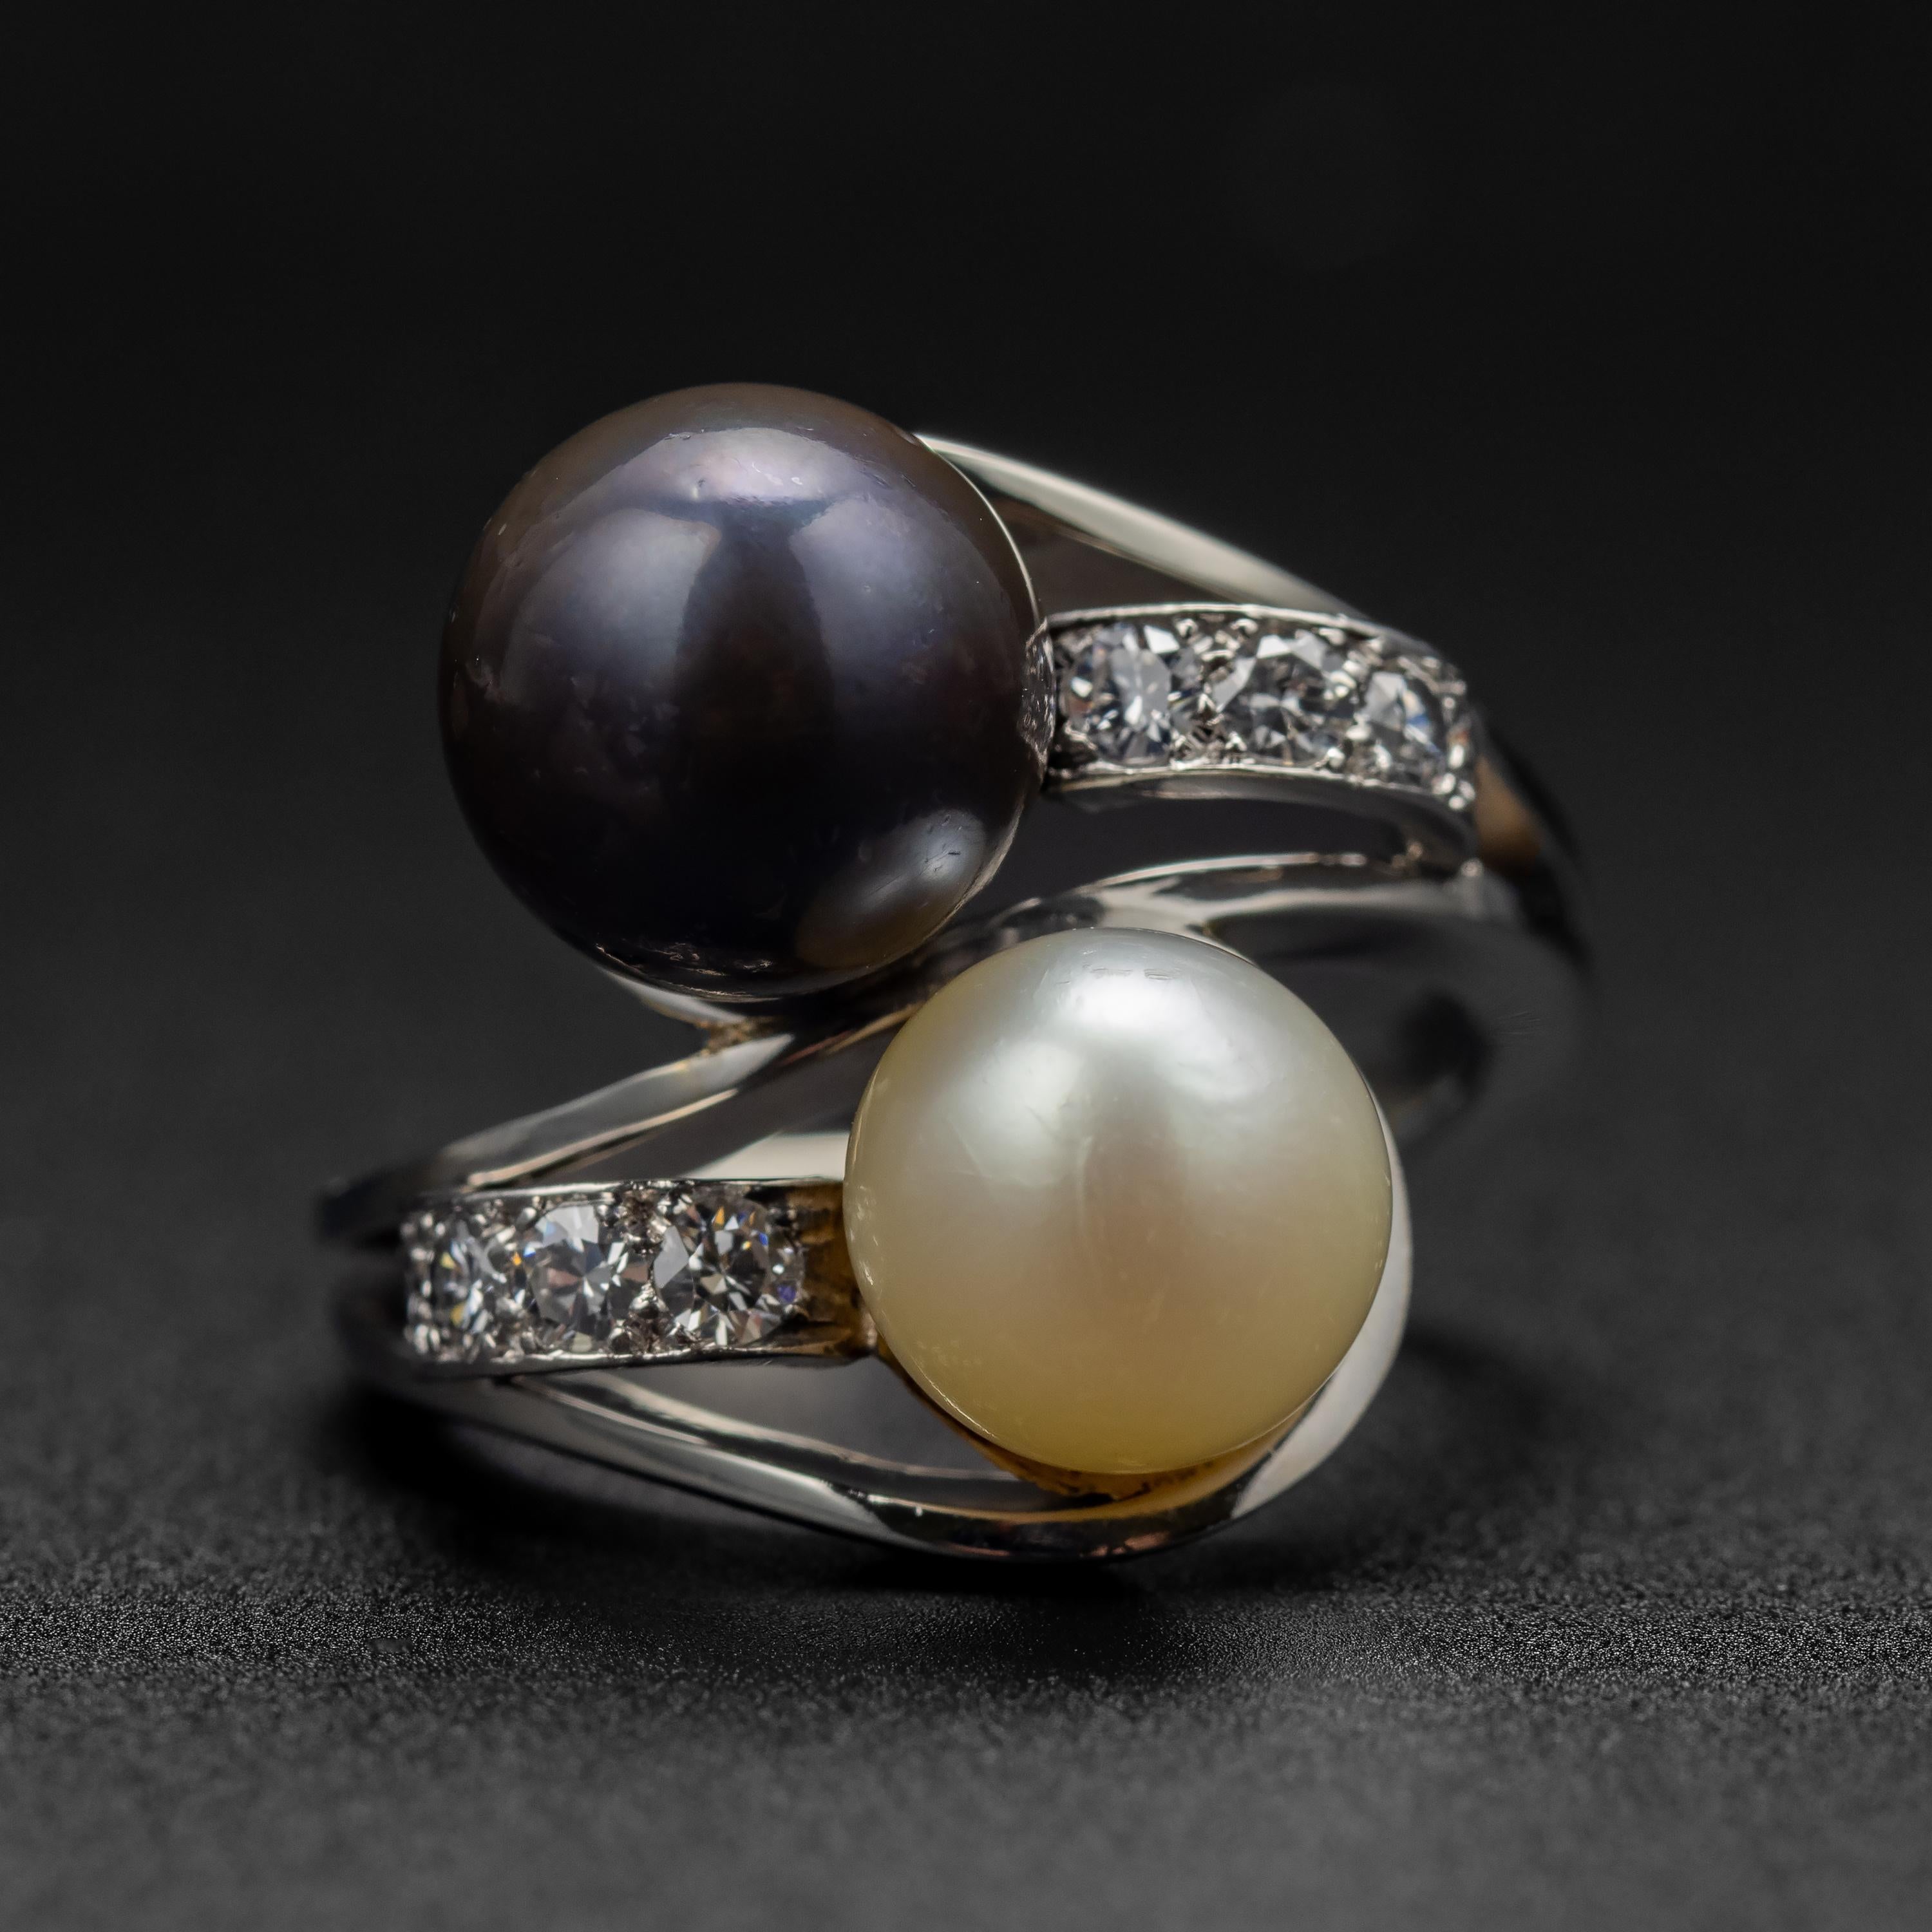 This exceedingly well-made cultured Akoya pearl bypass ring was created from gleaming 18K white gold by the hands of a French jeweler in the 1950s (or thereabouts). The pearls -one creamy white and the other aubergine- measure 8.40mm and 9.48mm.